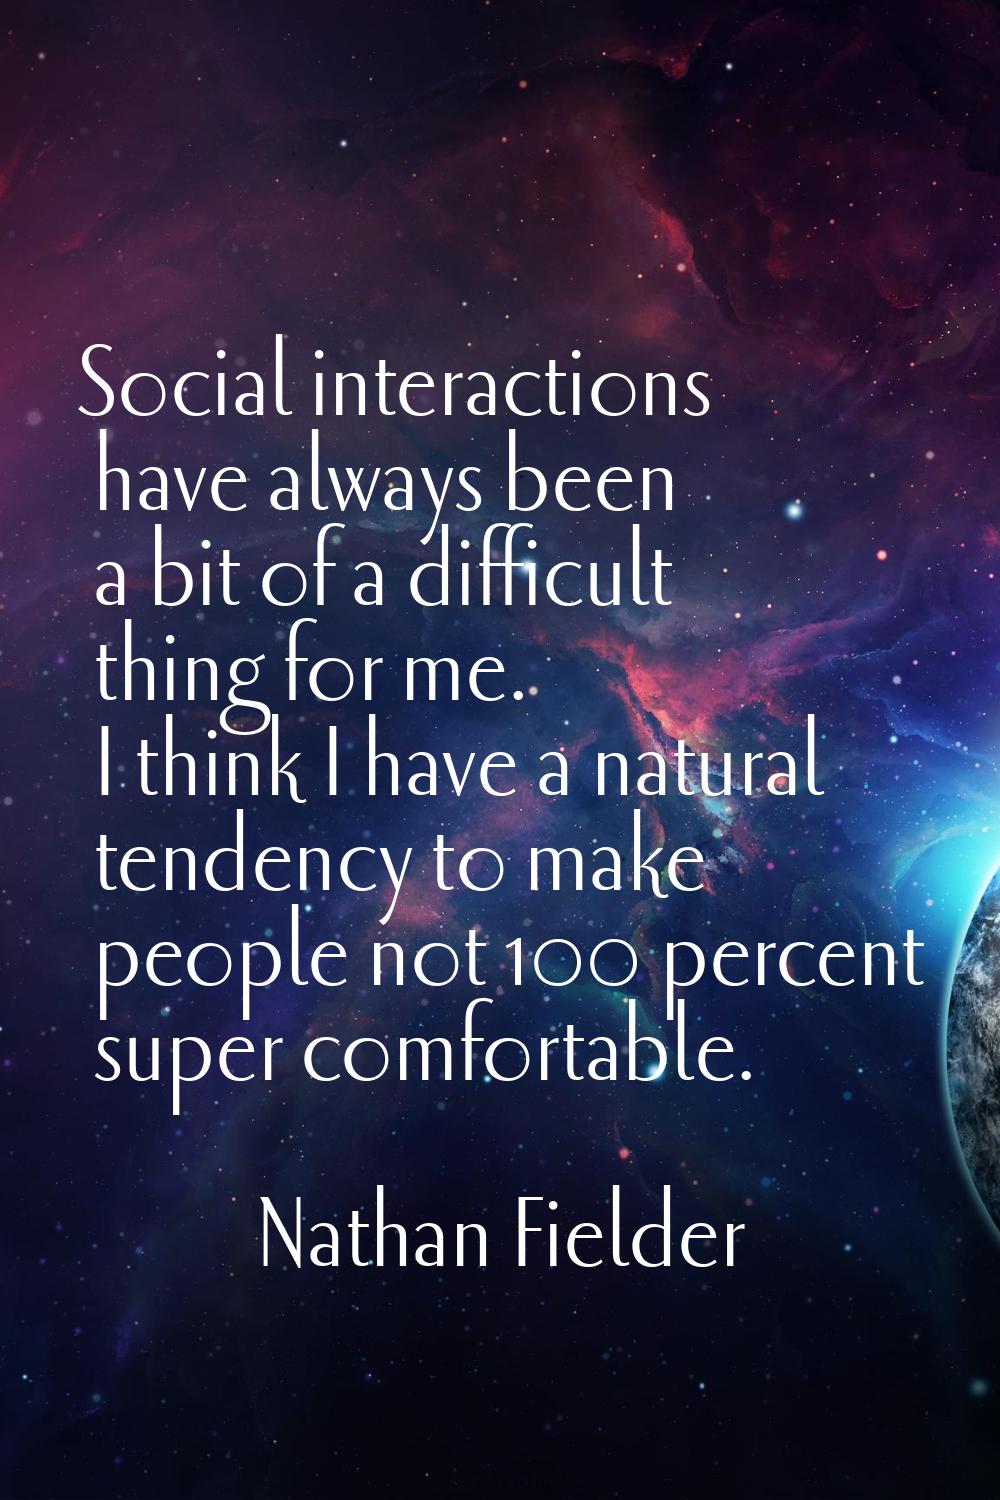 Social interactions have always been a bit of a difficult thing for me. I think I have a natural te